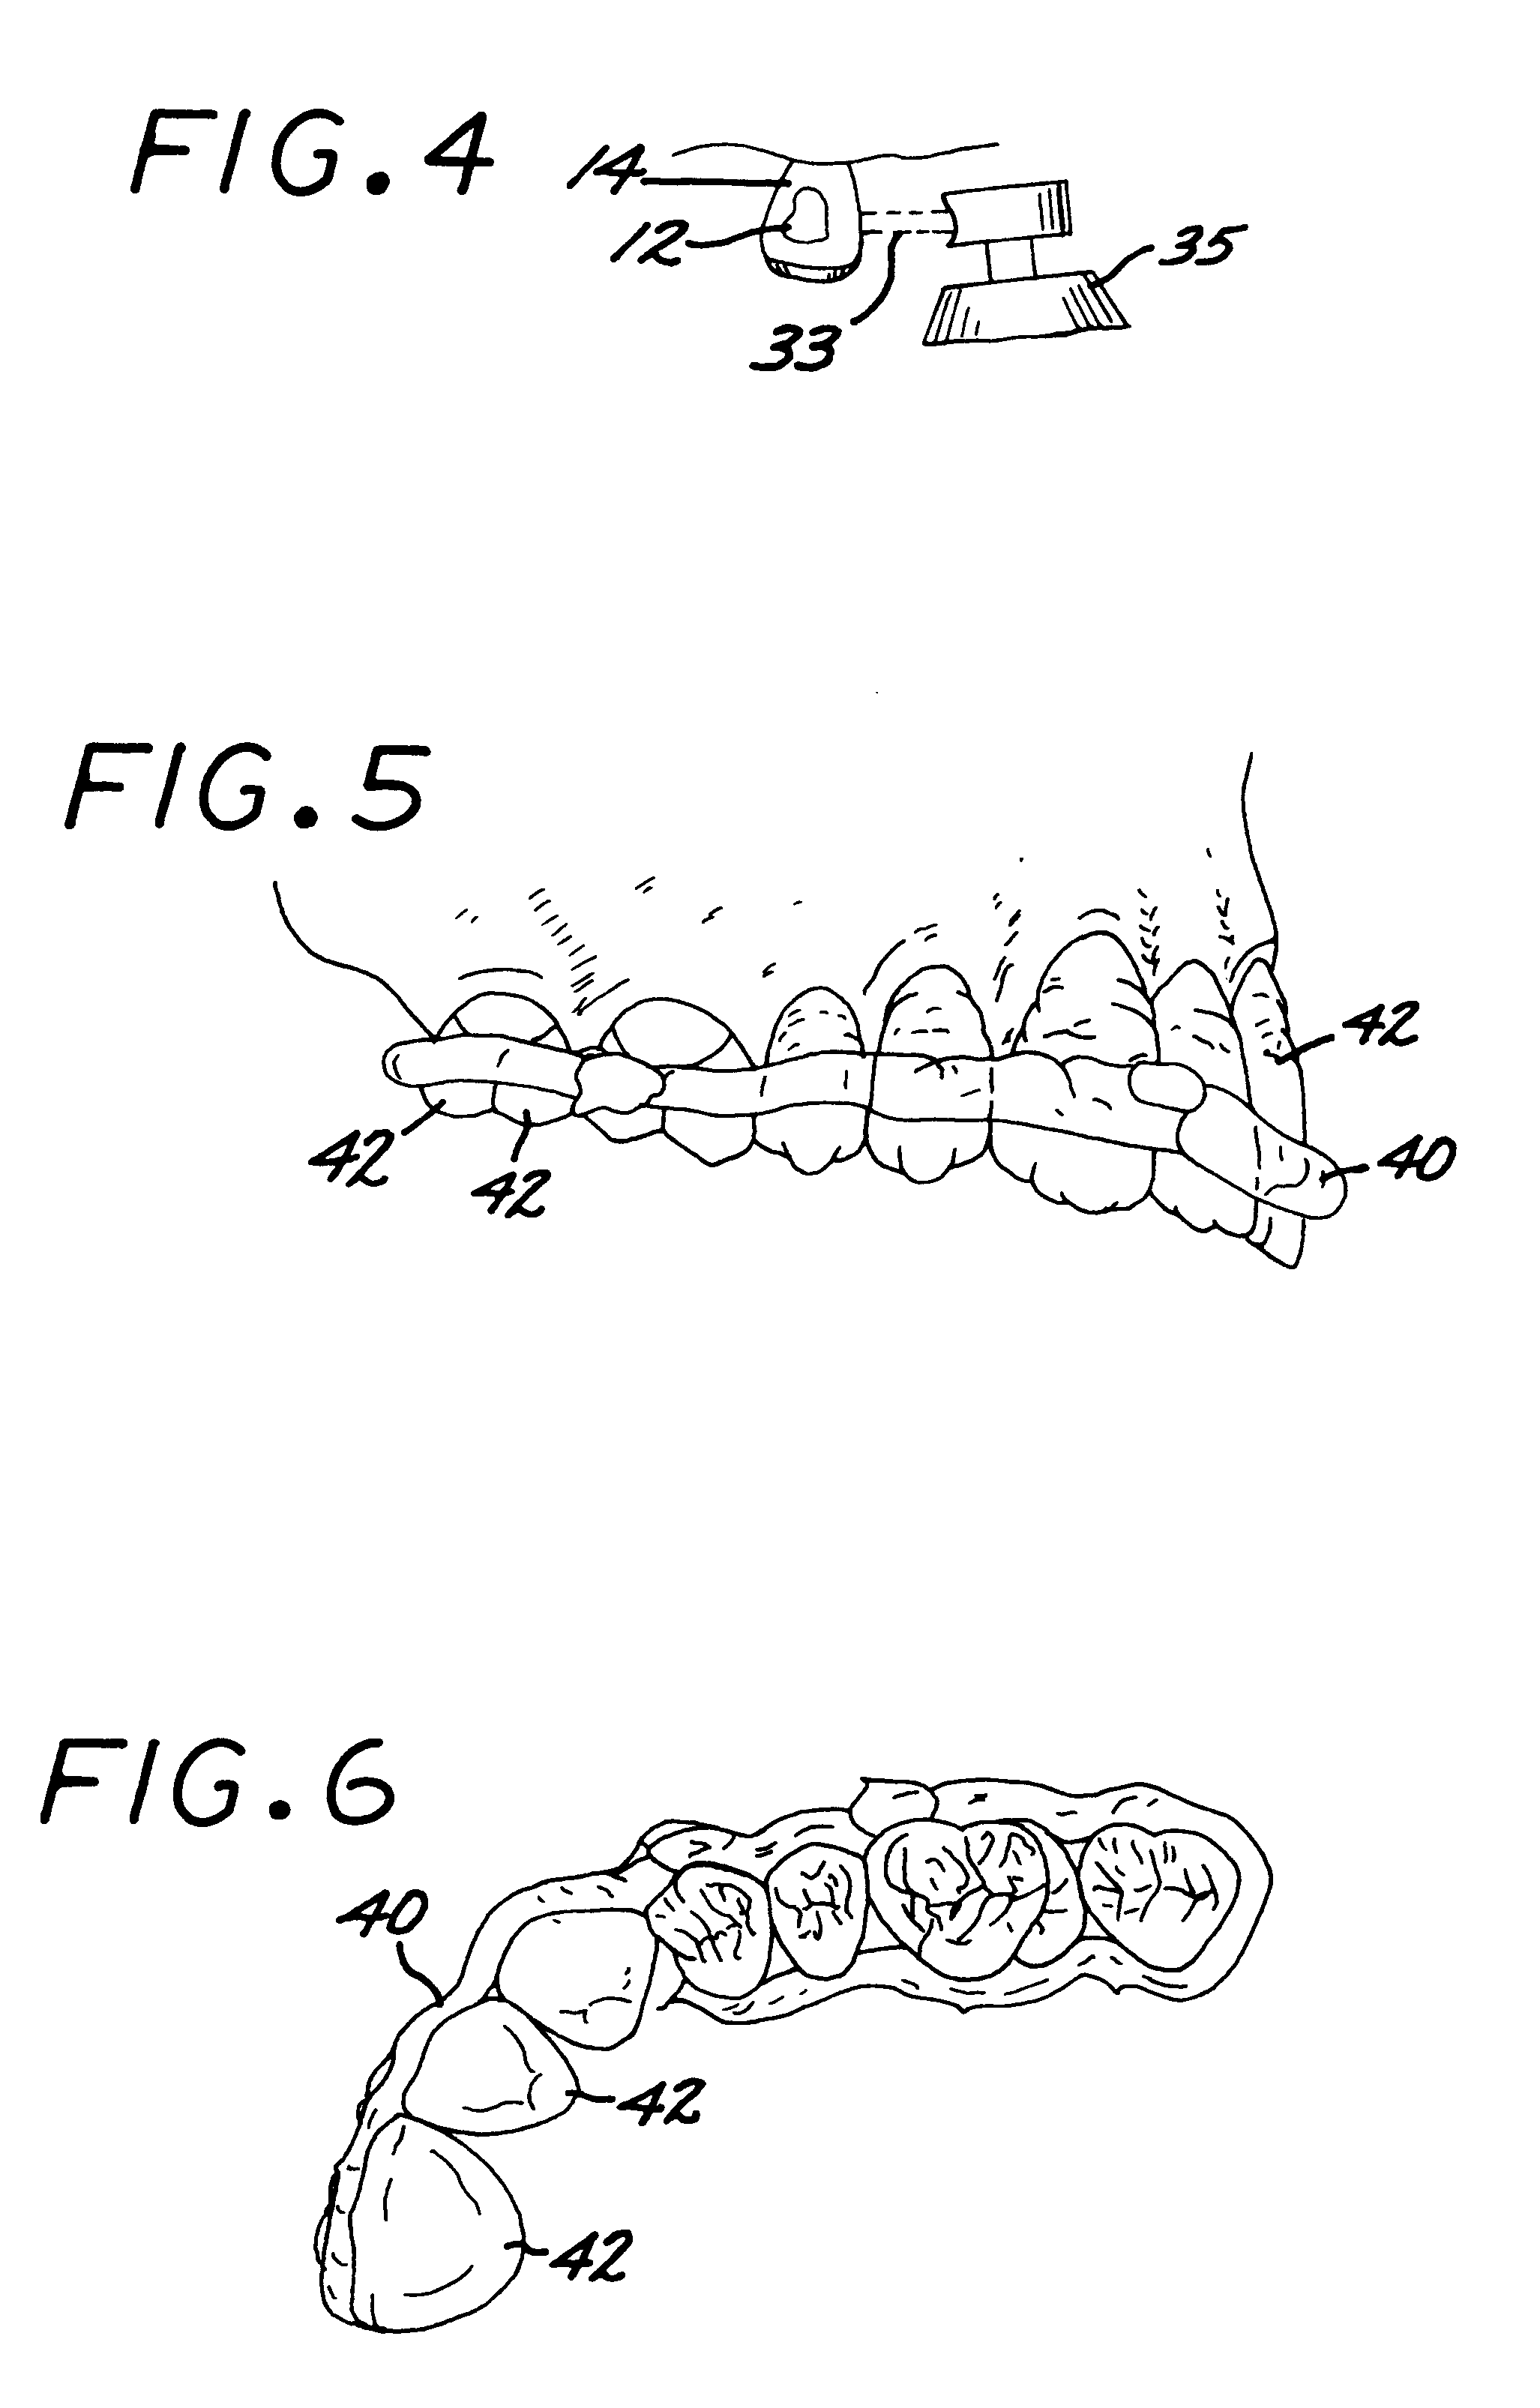 Method for fabricating removable denture prothesis using injection molding